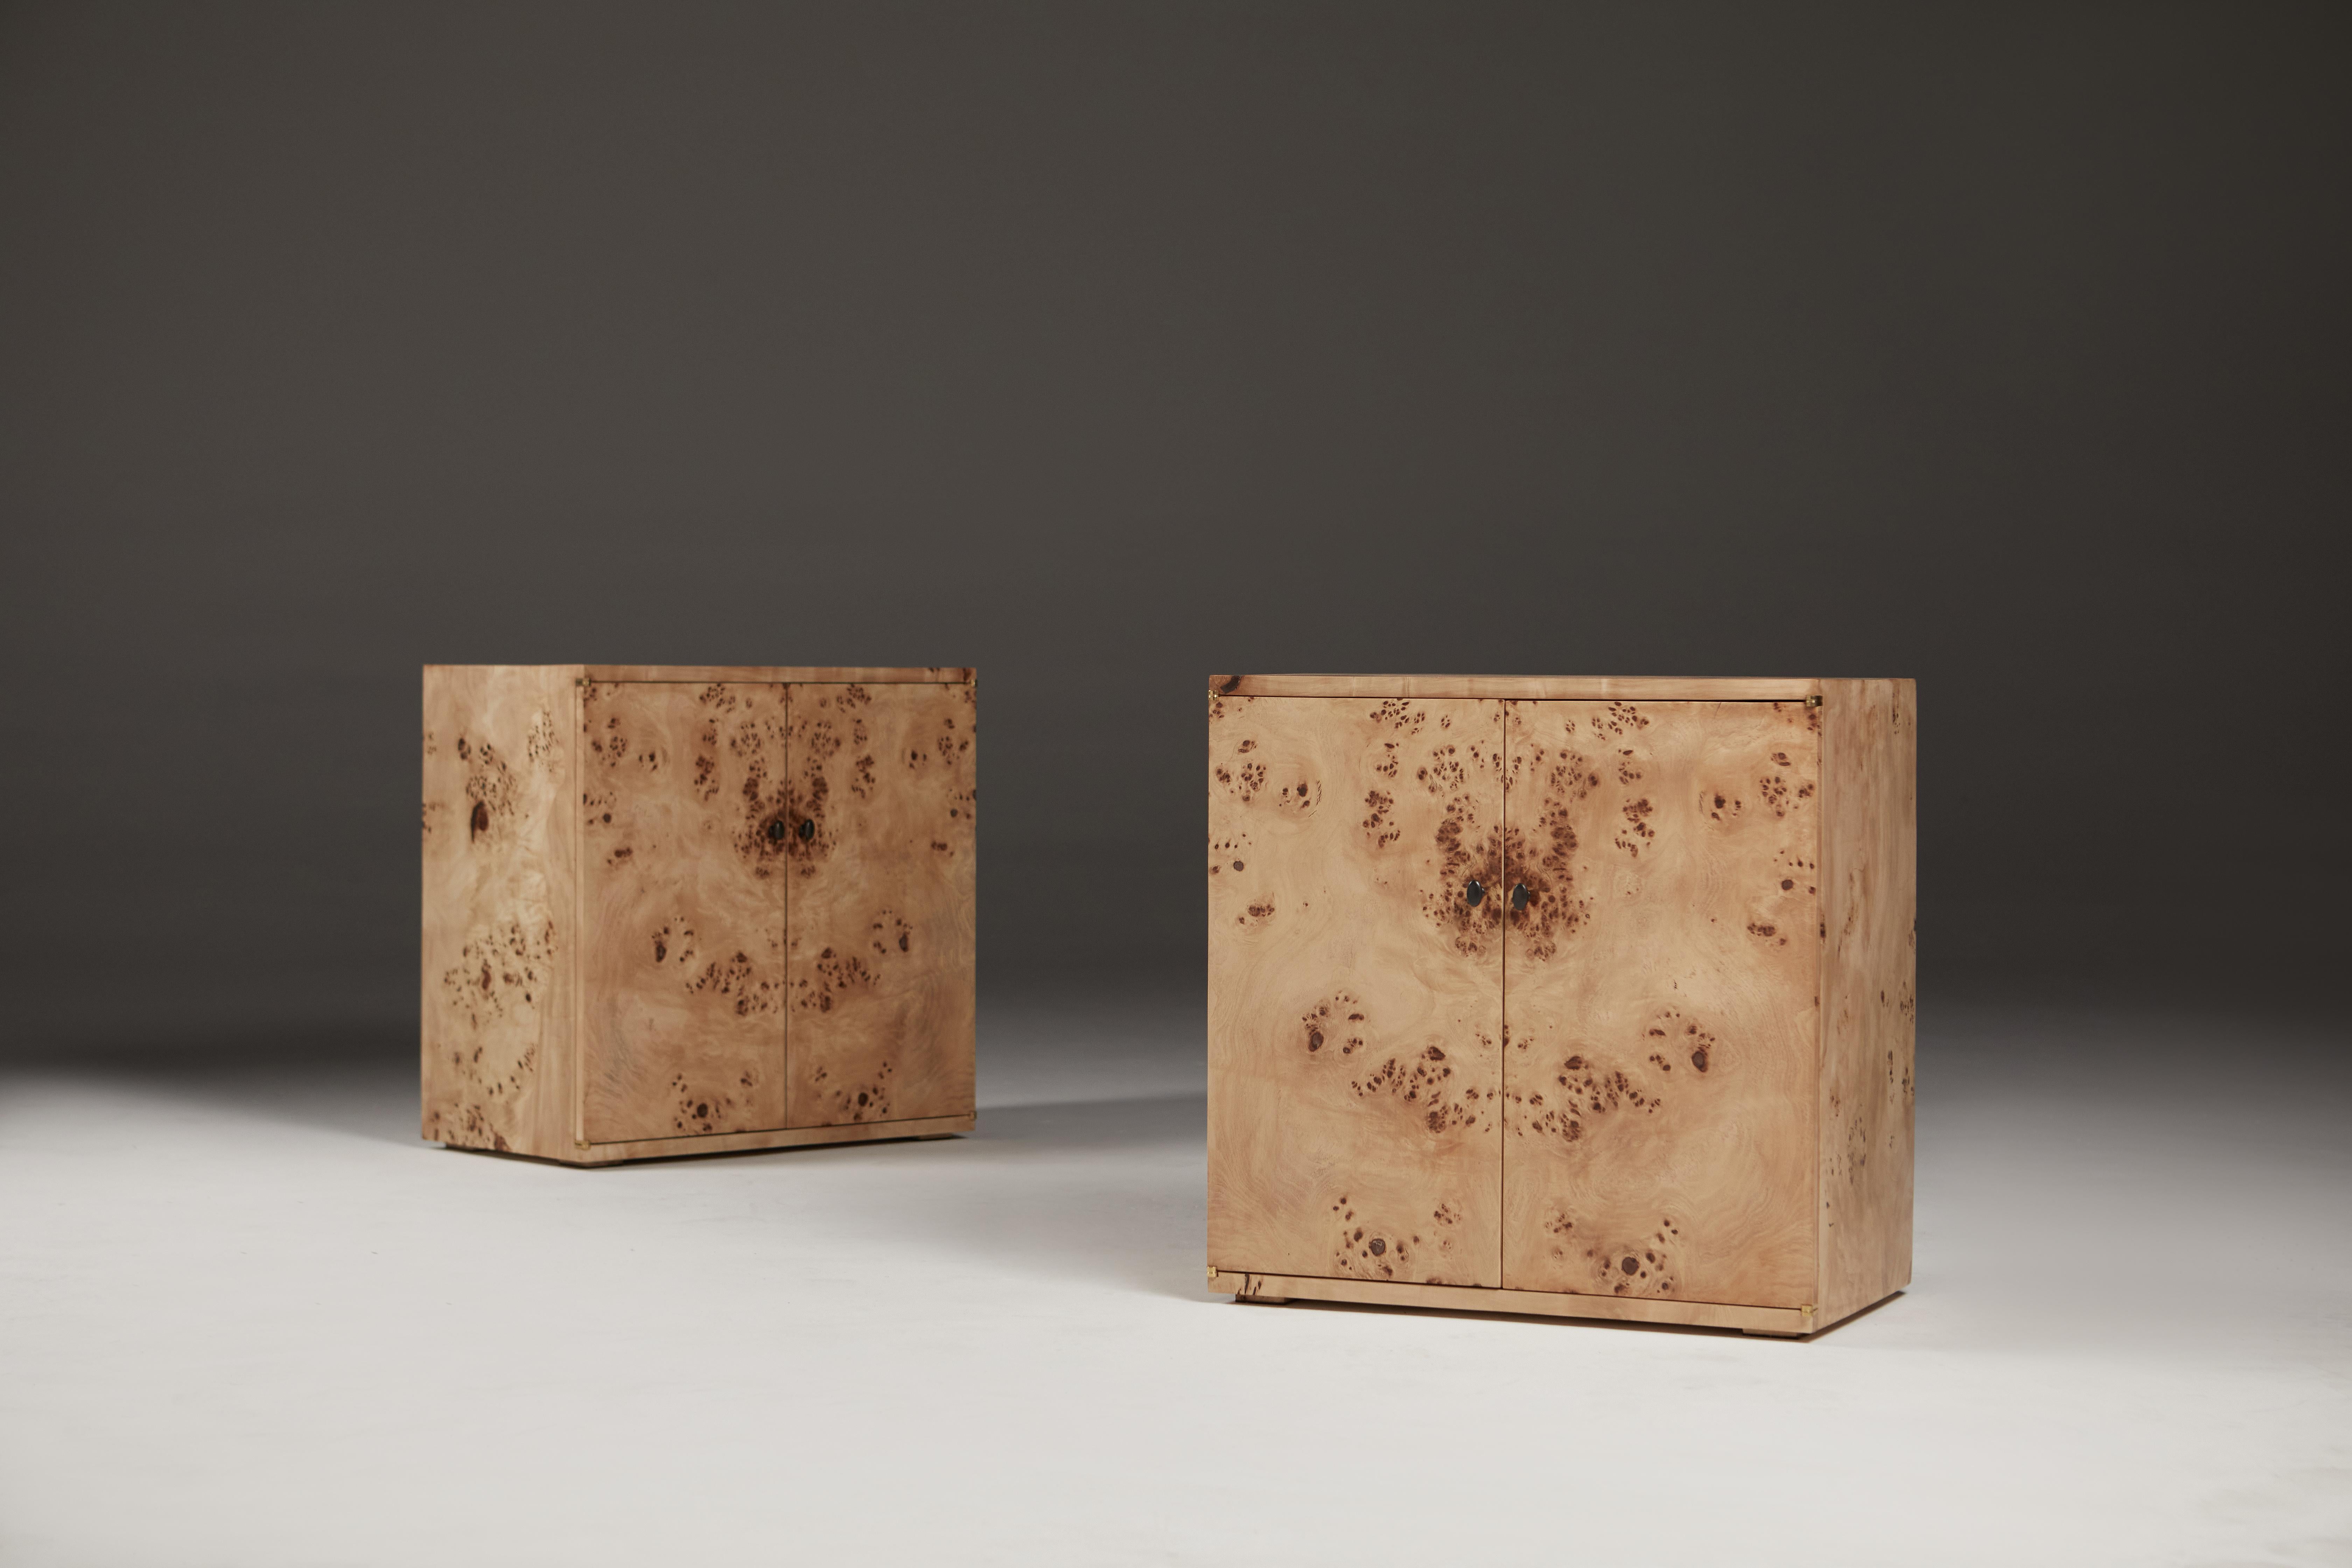 Book-matched bedside or living room cabinets in Mappa Burr.
A pair of bedside cabinets in Mappa Burr (Poplar) with bronze handles. 
Internally there is a single adjustable shelf. The doors are held closed by earth magnets and have traditional bronze